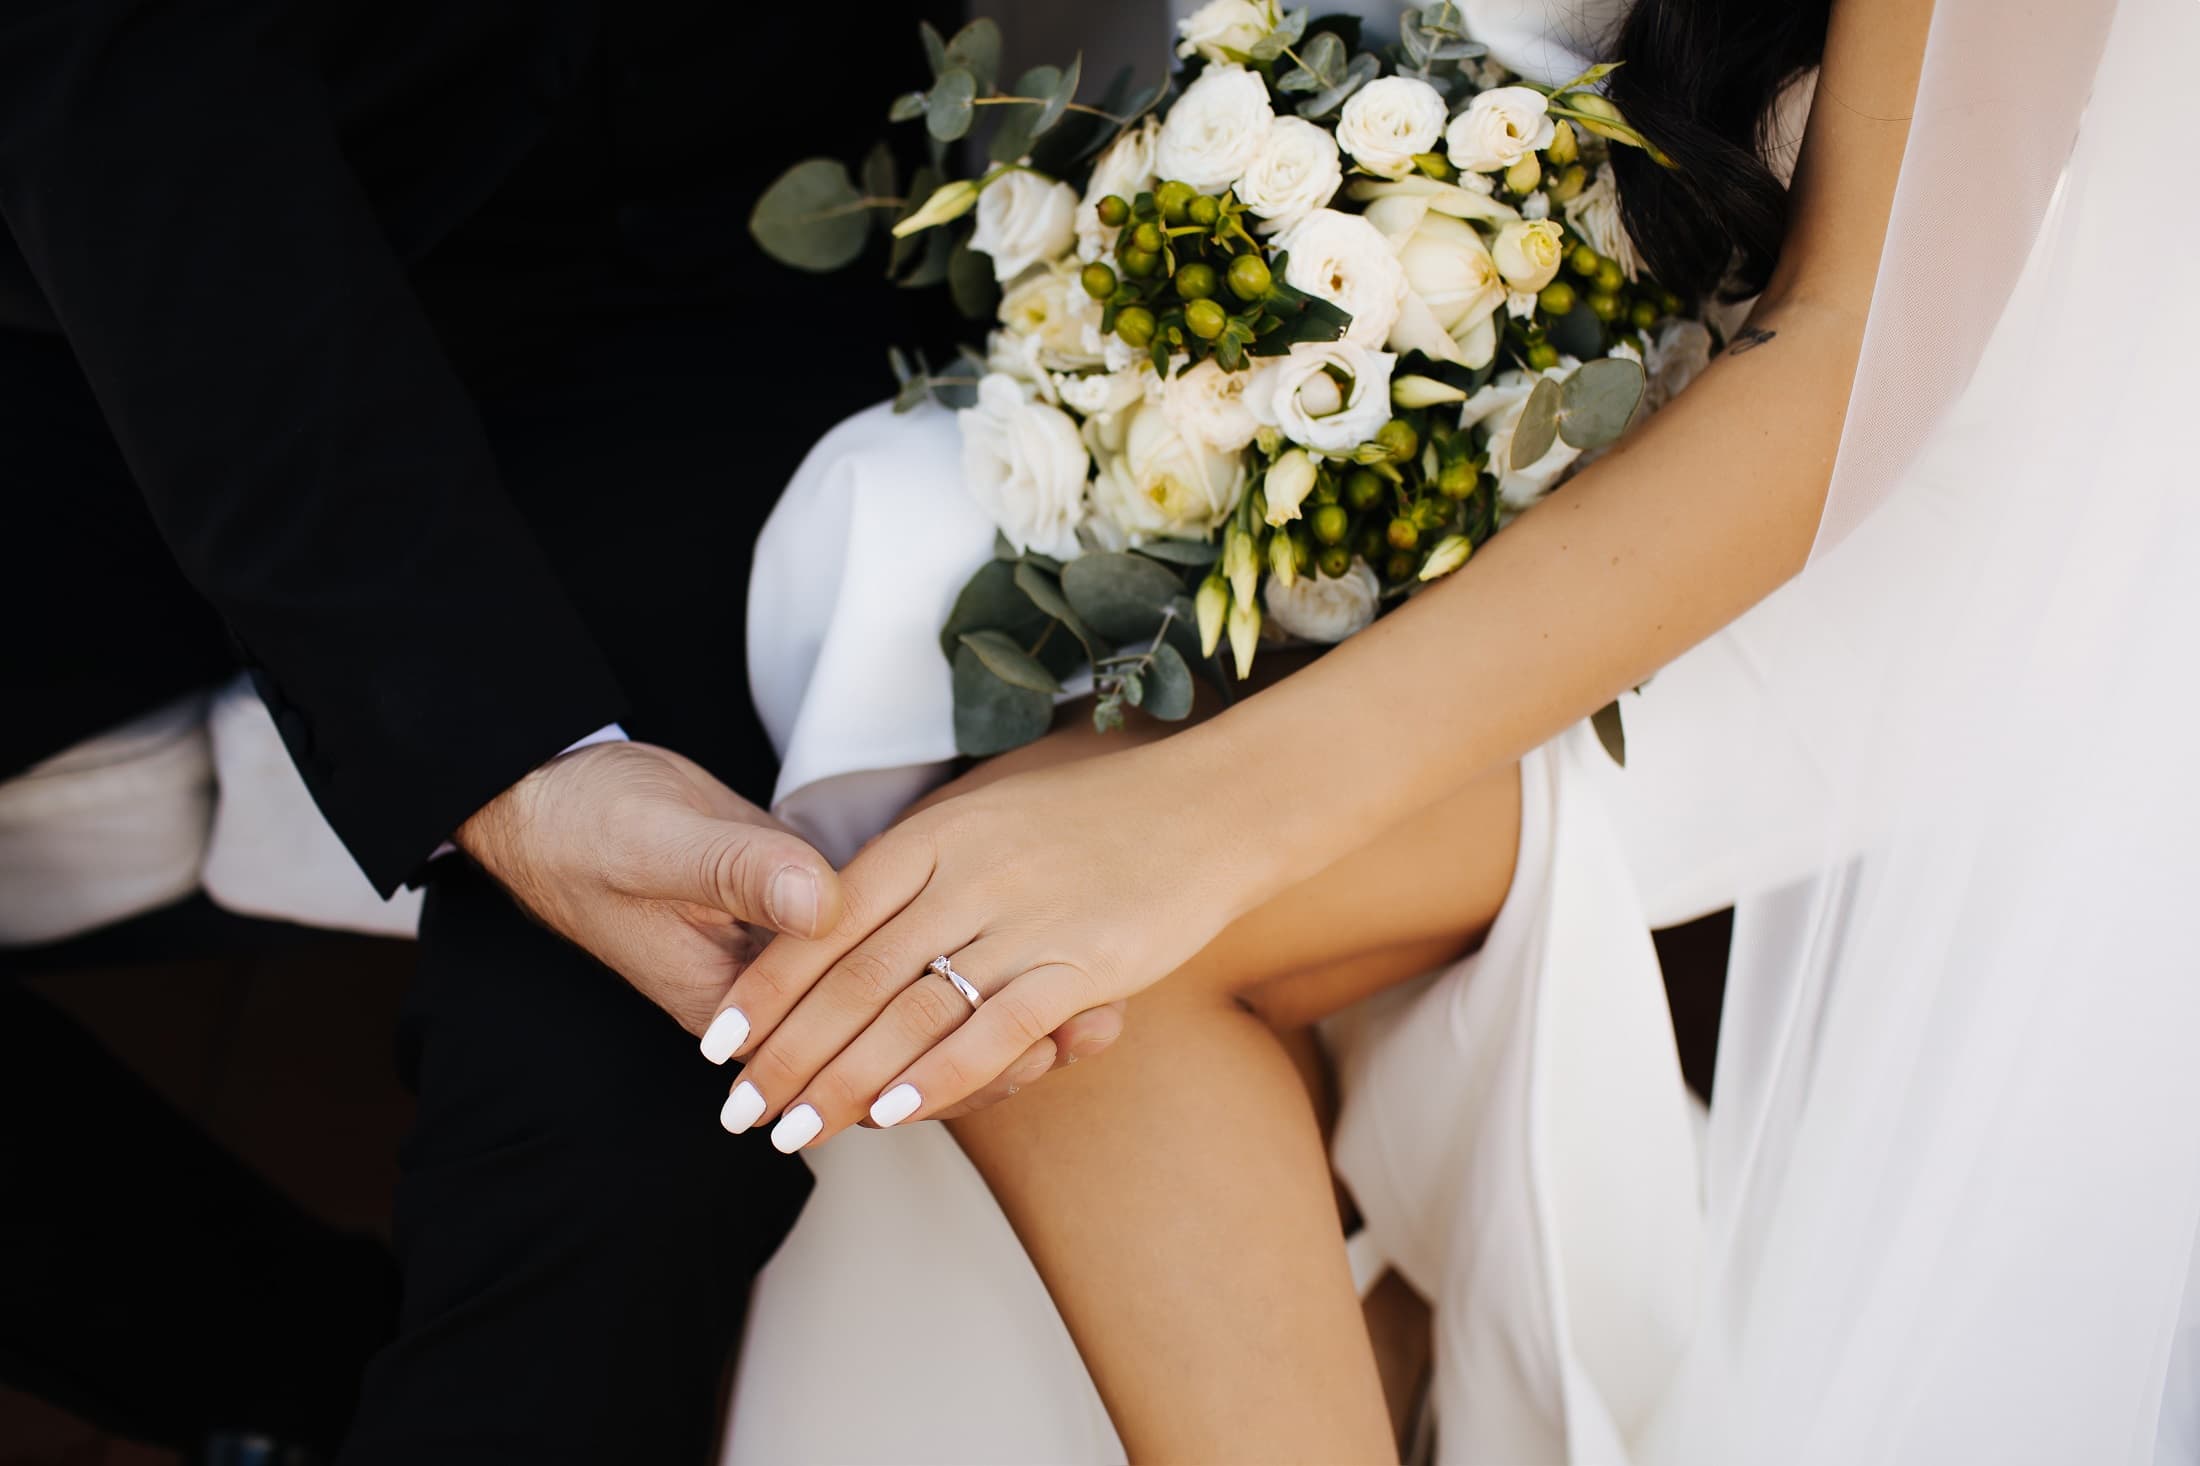 How to match the bouquet to the wedding dress? We suggest!